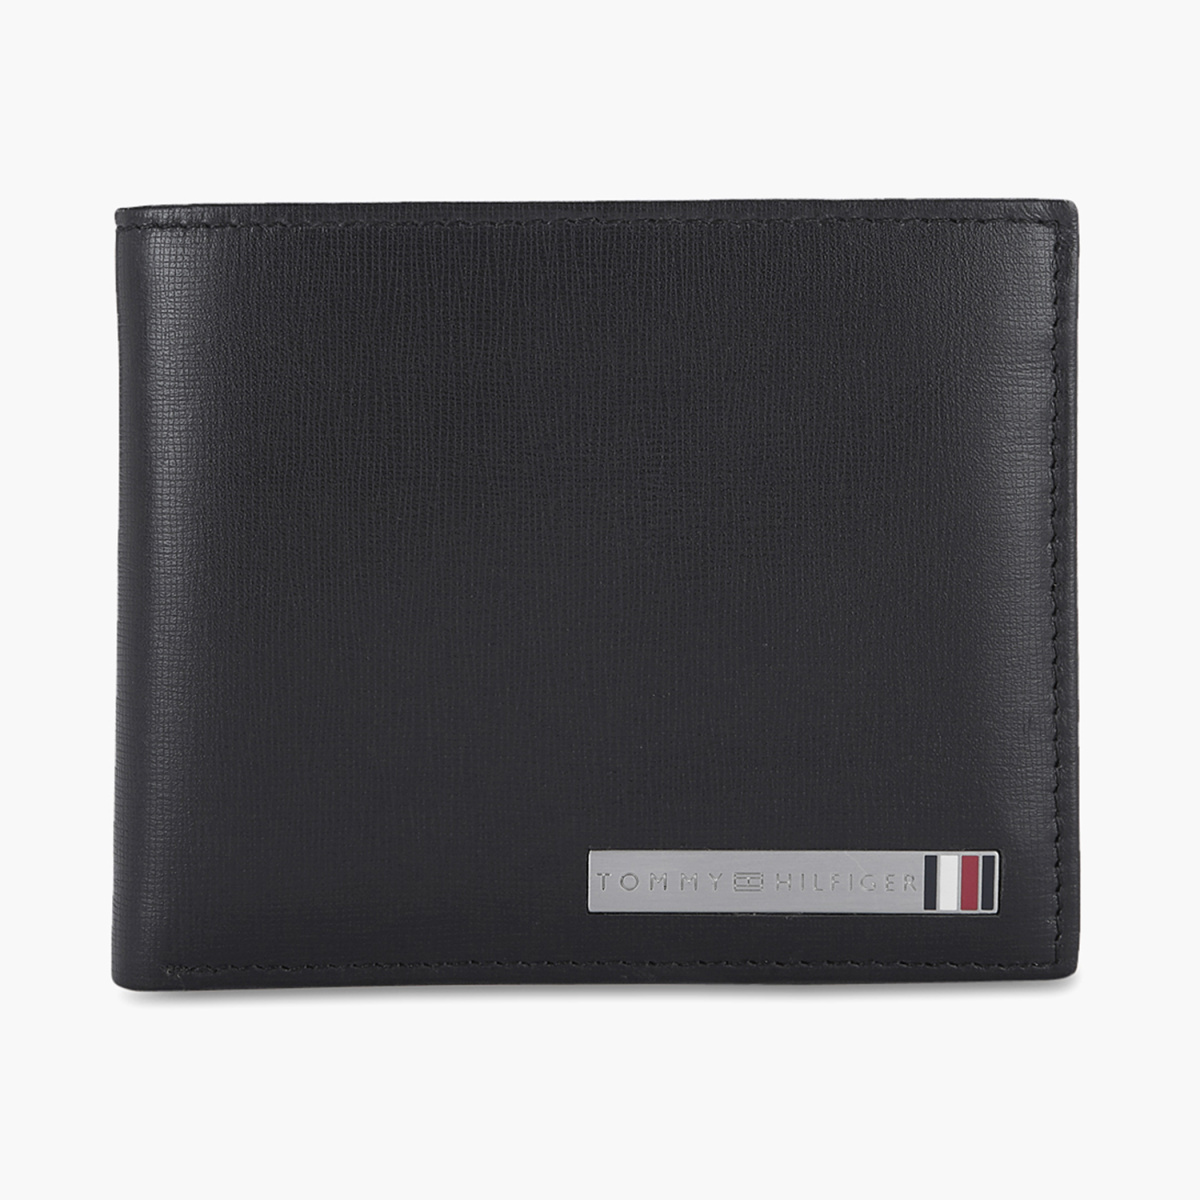 TOMMY HILFIGER Textured Leather Wallet